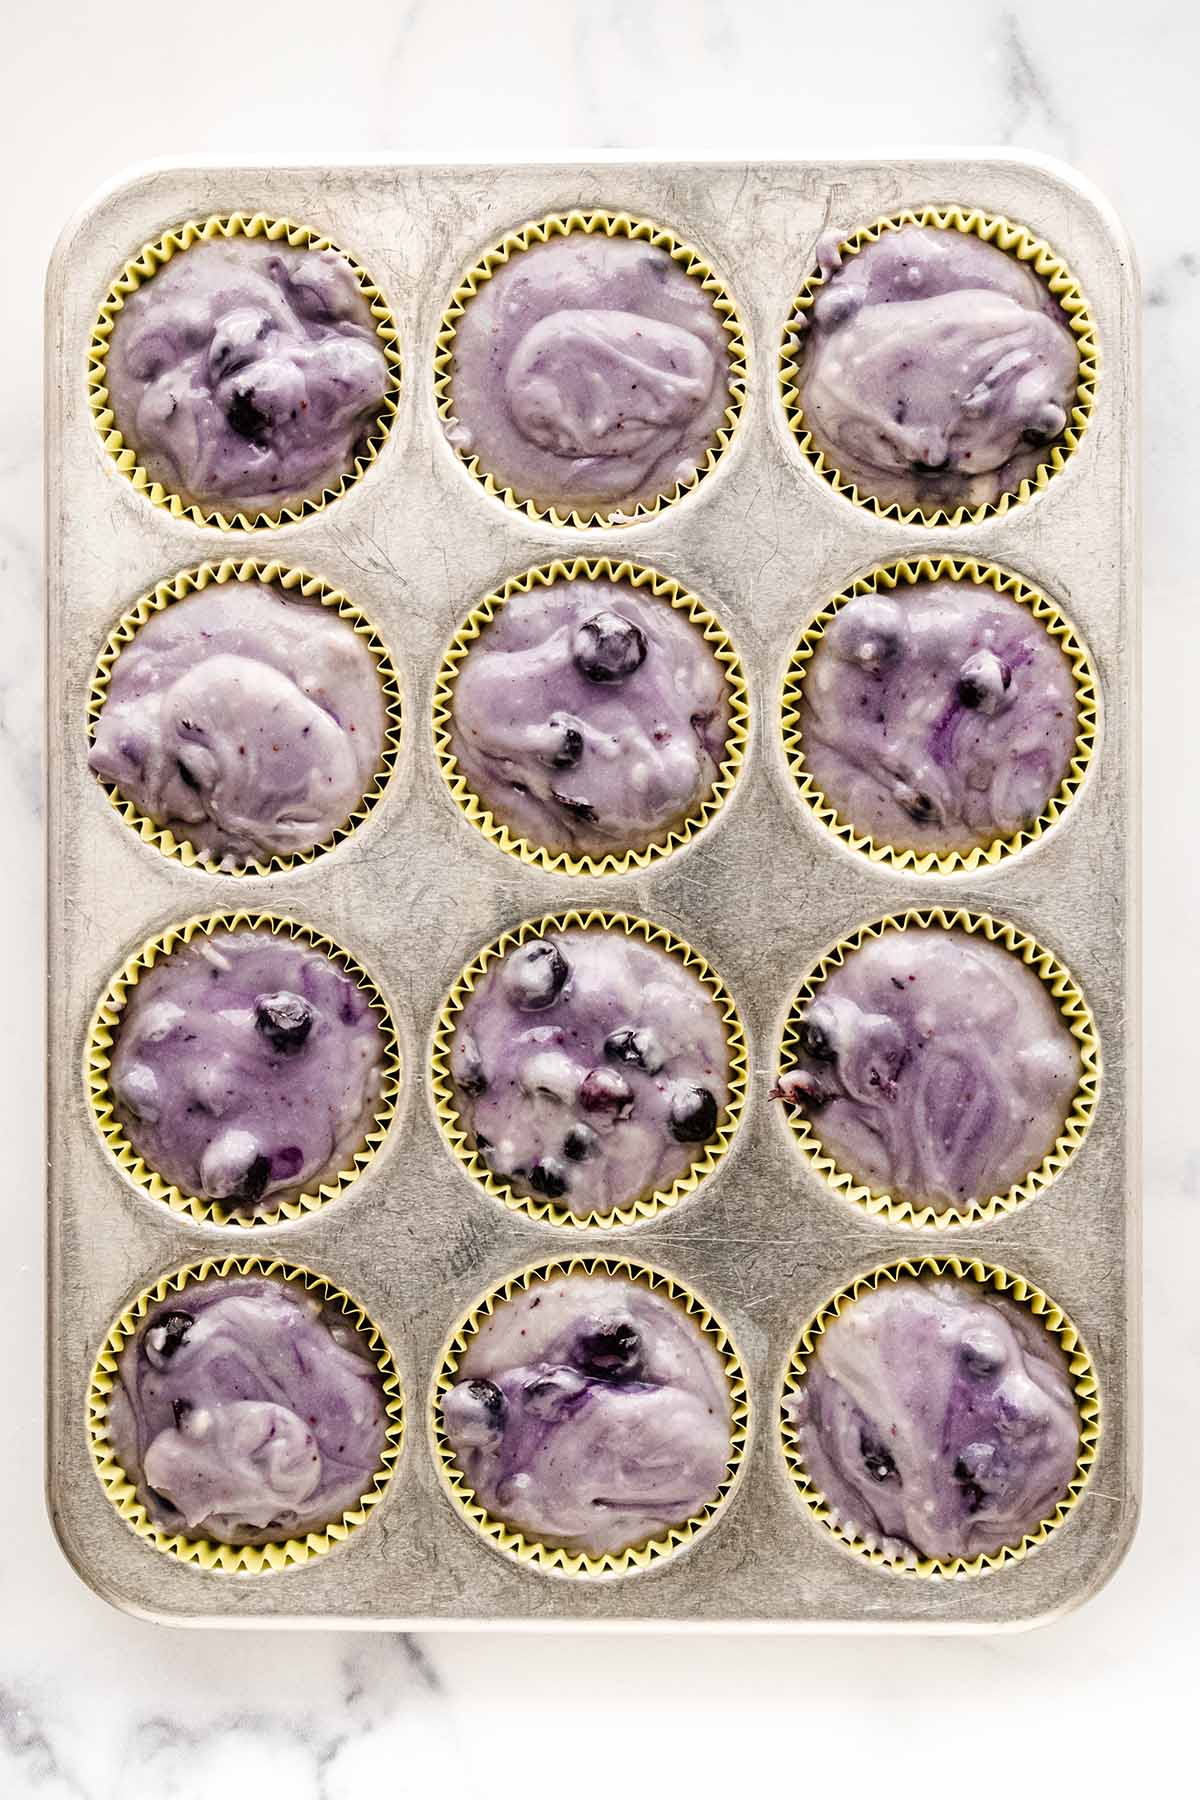 Overhead view of batter in wells in a muffin pan